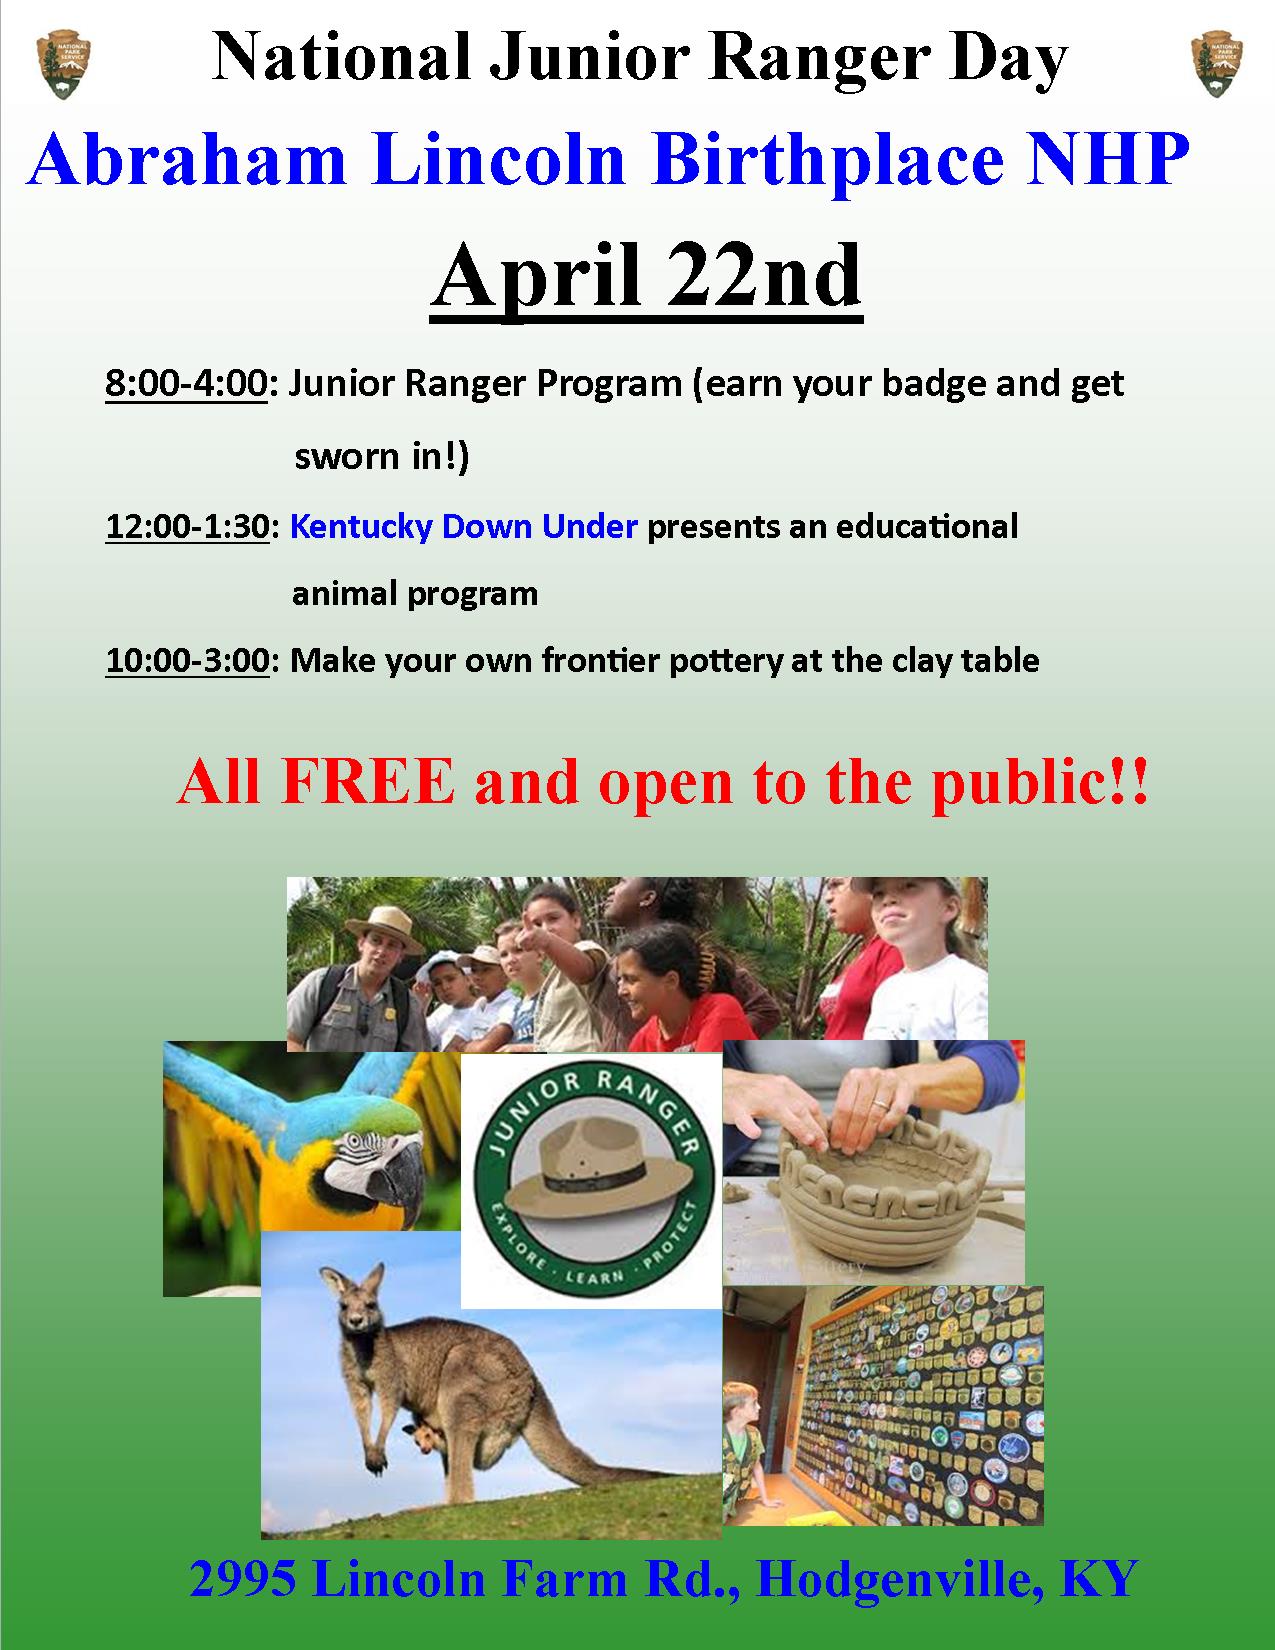 The Abraham Lincoln Birthplace NHP will celebrate National Junior Ranger Day with events throughout the day.